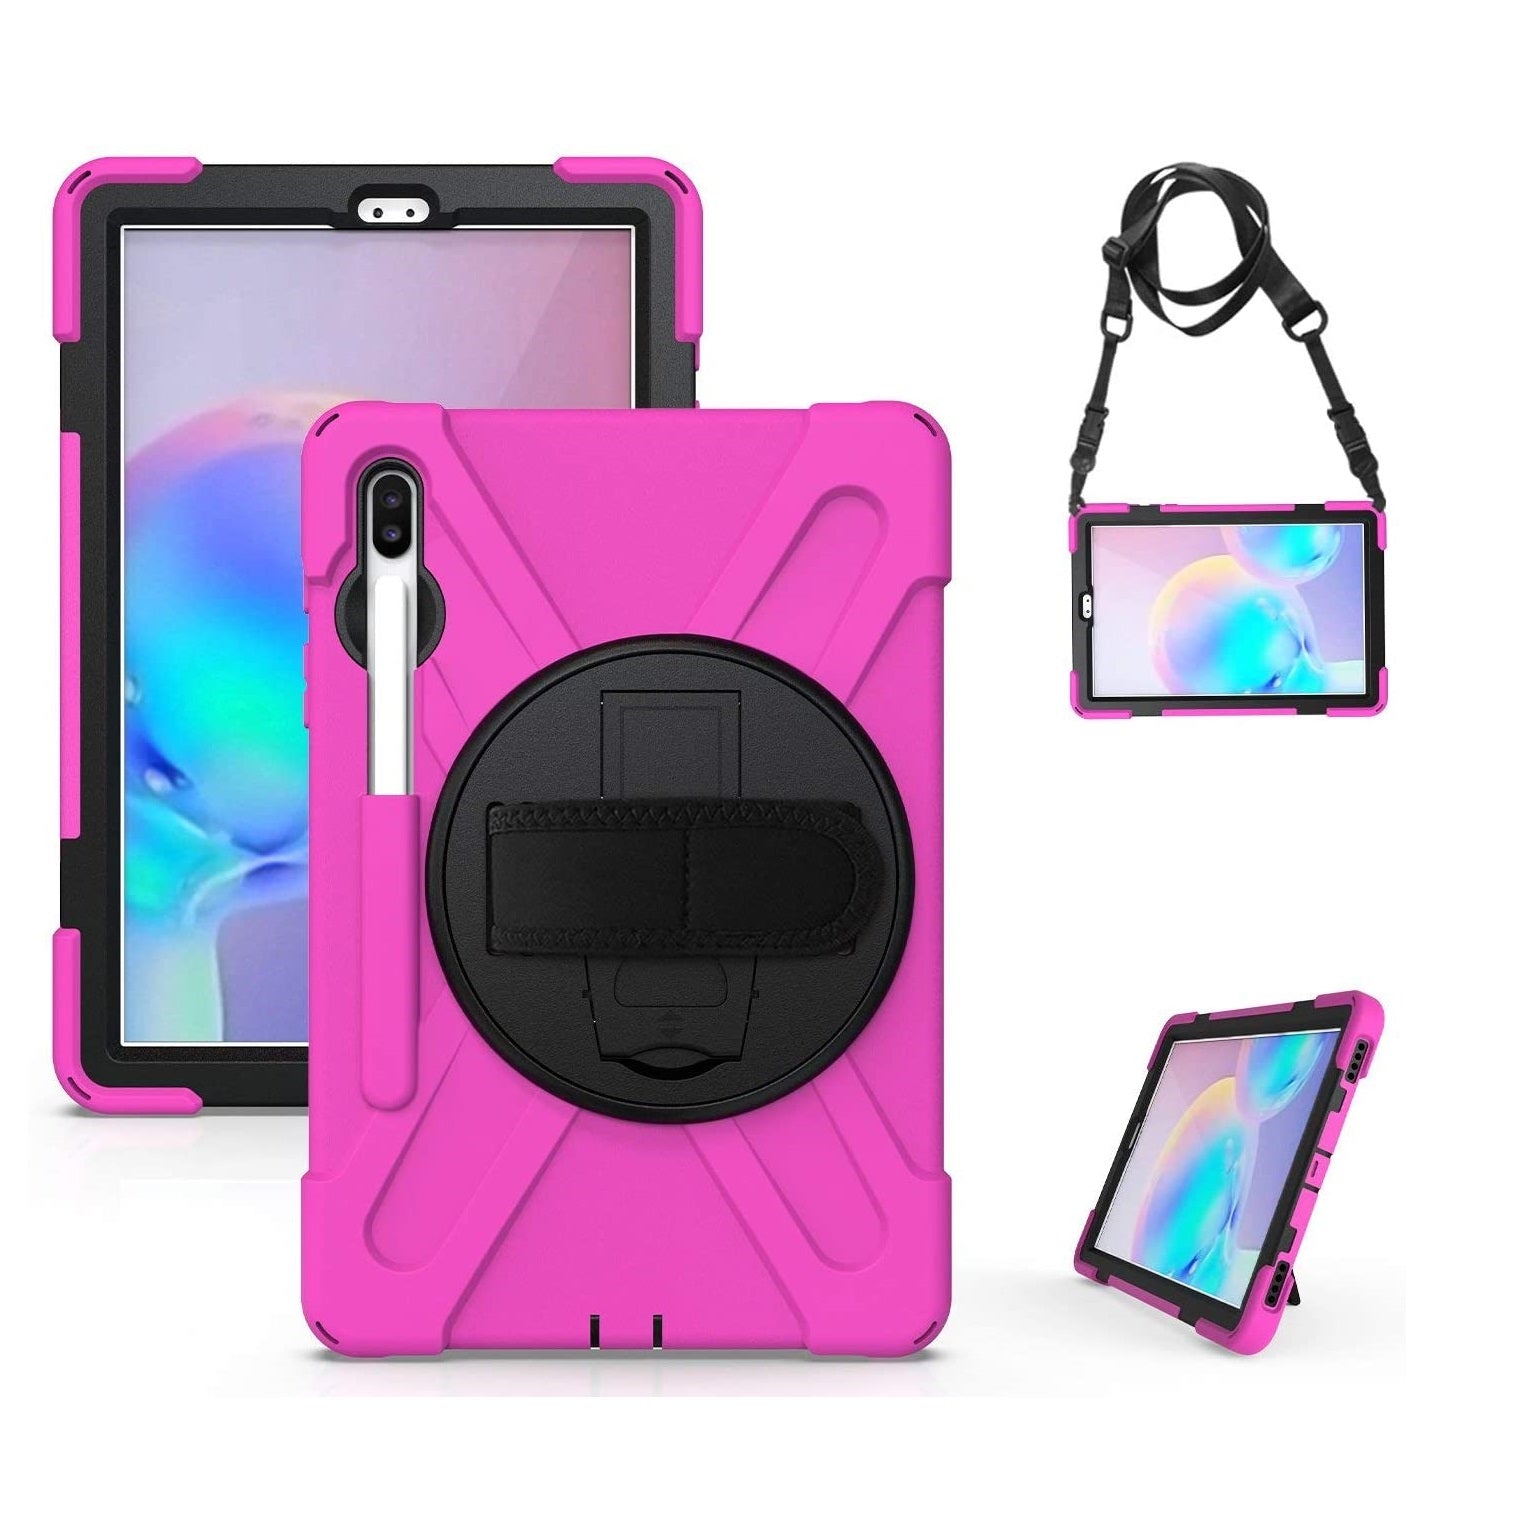 https://caserace.net/products/rugged-heavy-duty-cover-for-samsung-galaxy-tab-s6-t860-with-strap-and-pencil-holder-pink